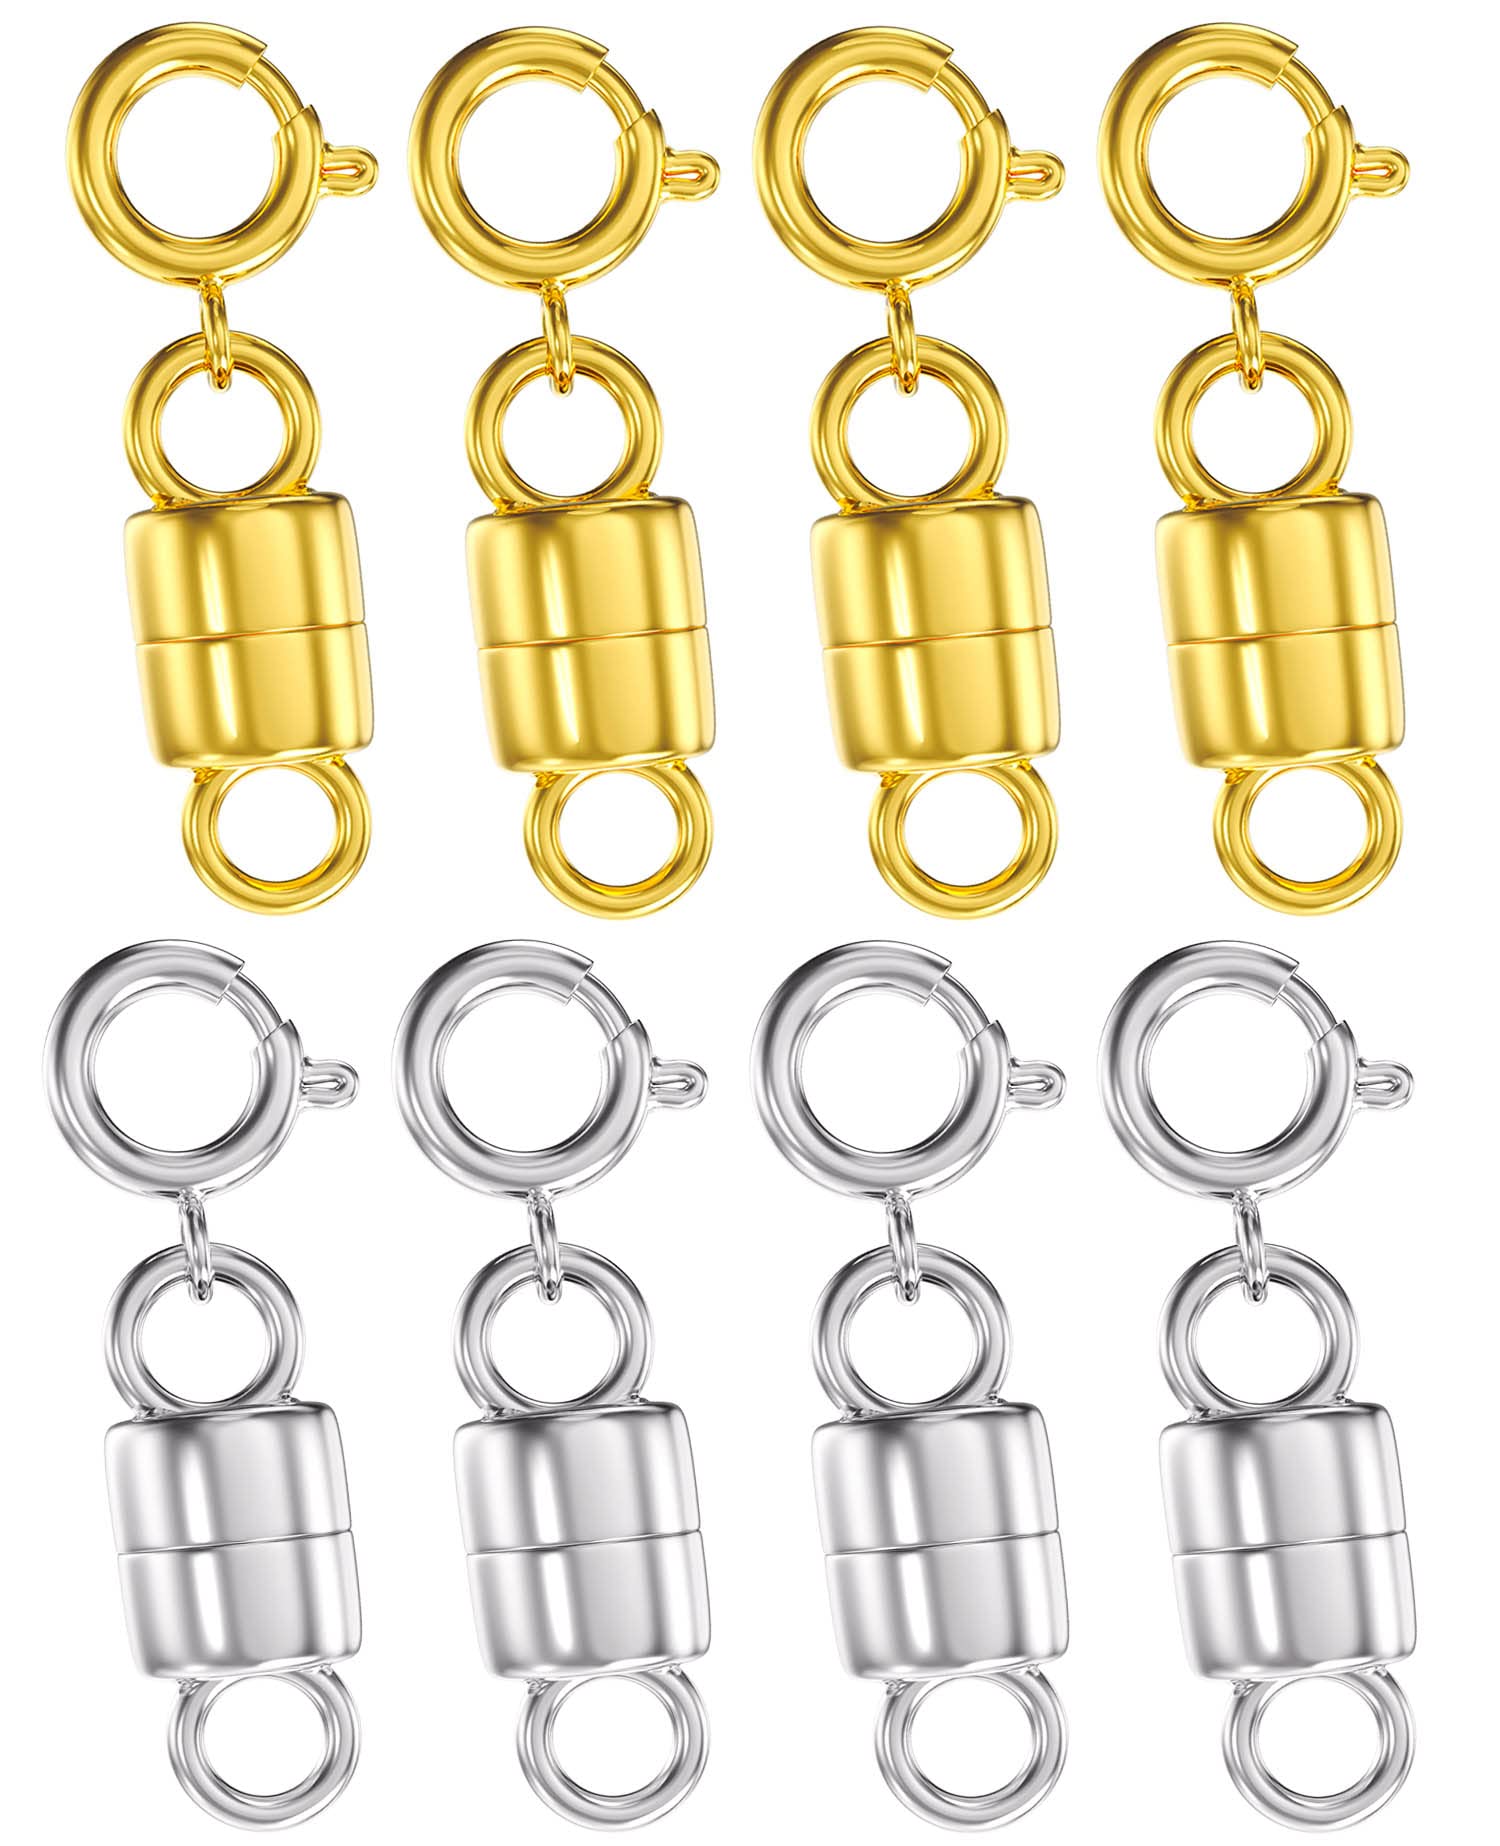 DEELLEEO 12 Pcs Locking Magnetic Jewelry Clasps for Women,Gold & Sliver  Necklaces Chains Bracelets Clasp and Closures Extender with Lobster Claw  Clip Converter for Jewelry Making Crafts Lanyards DIY 